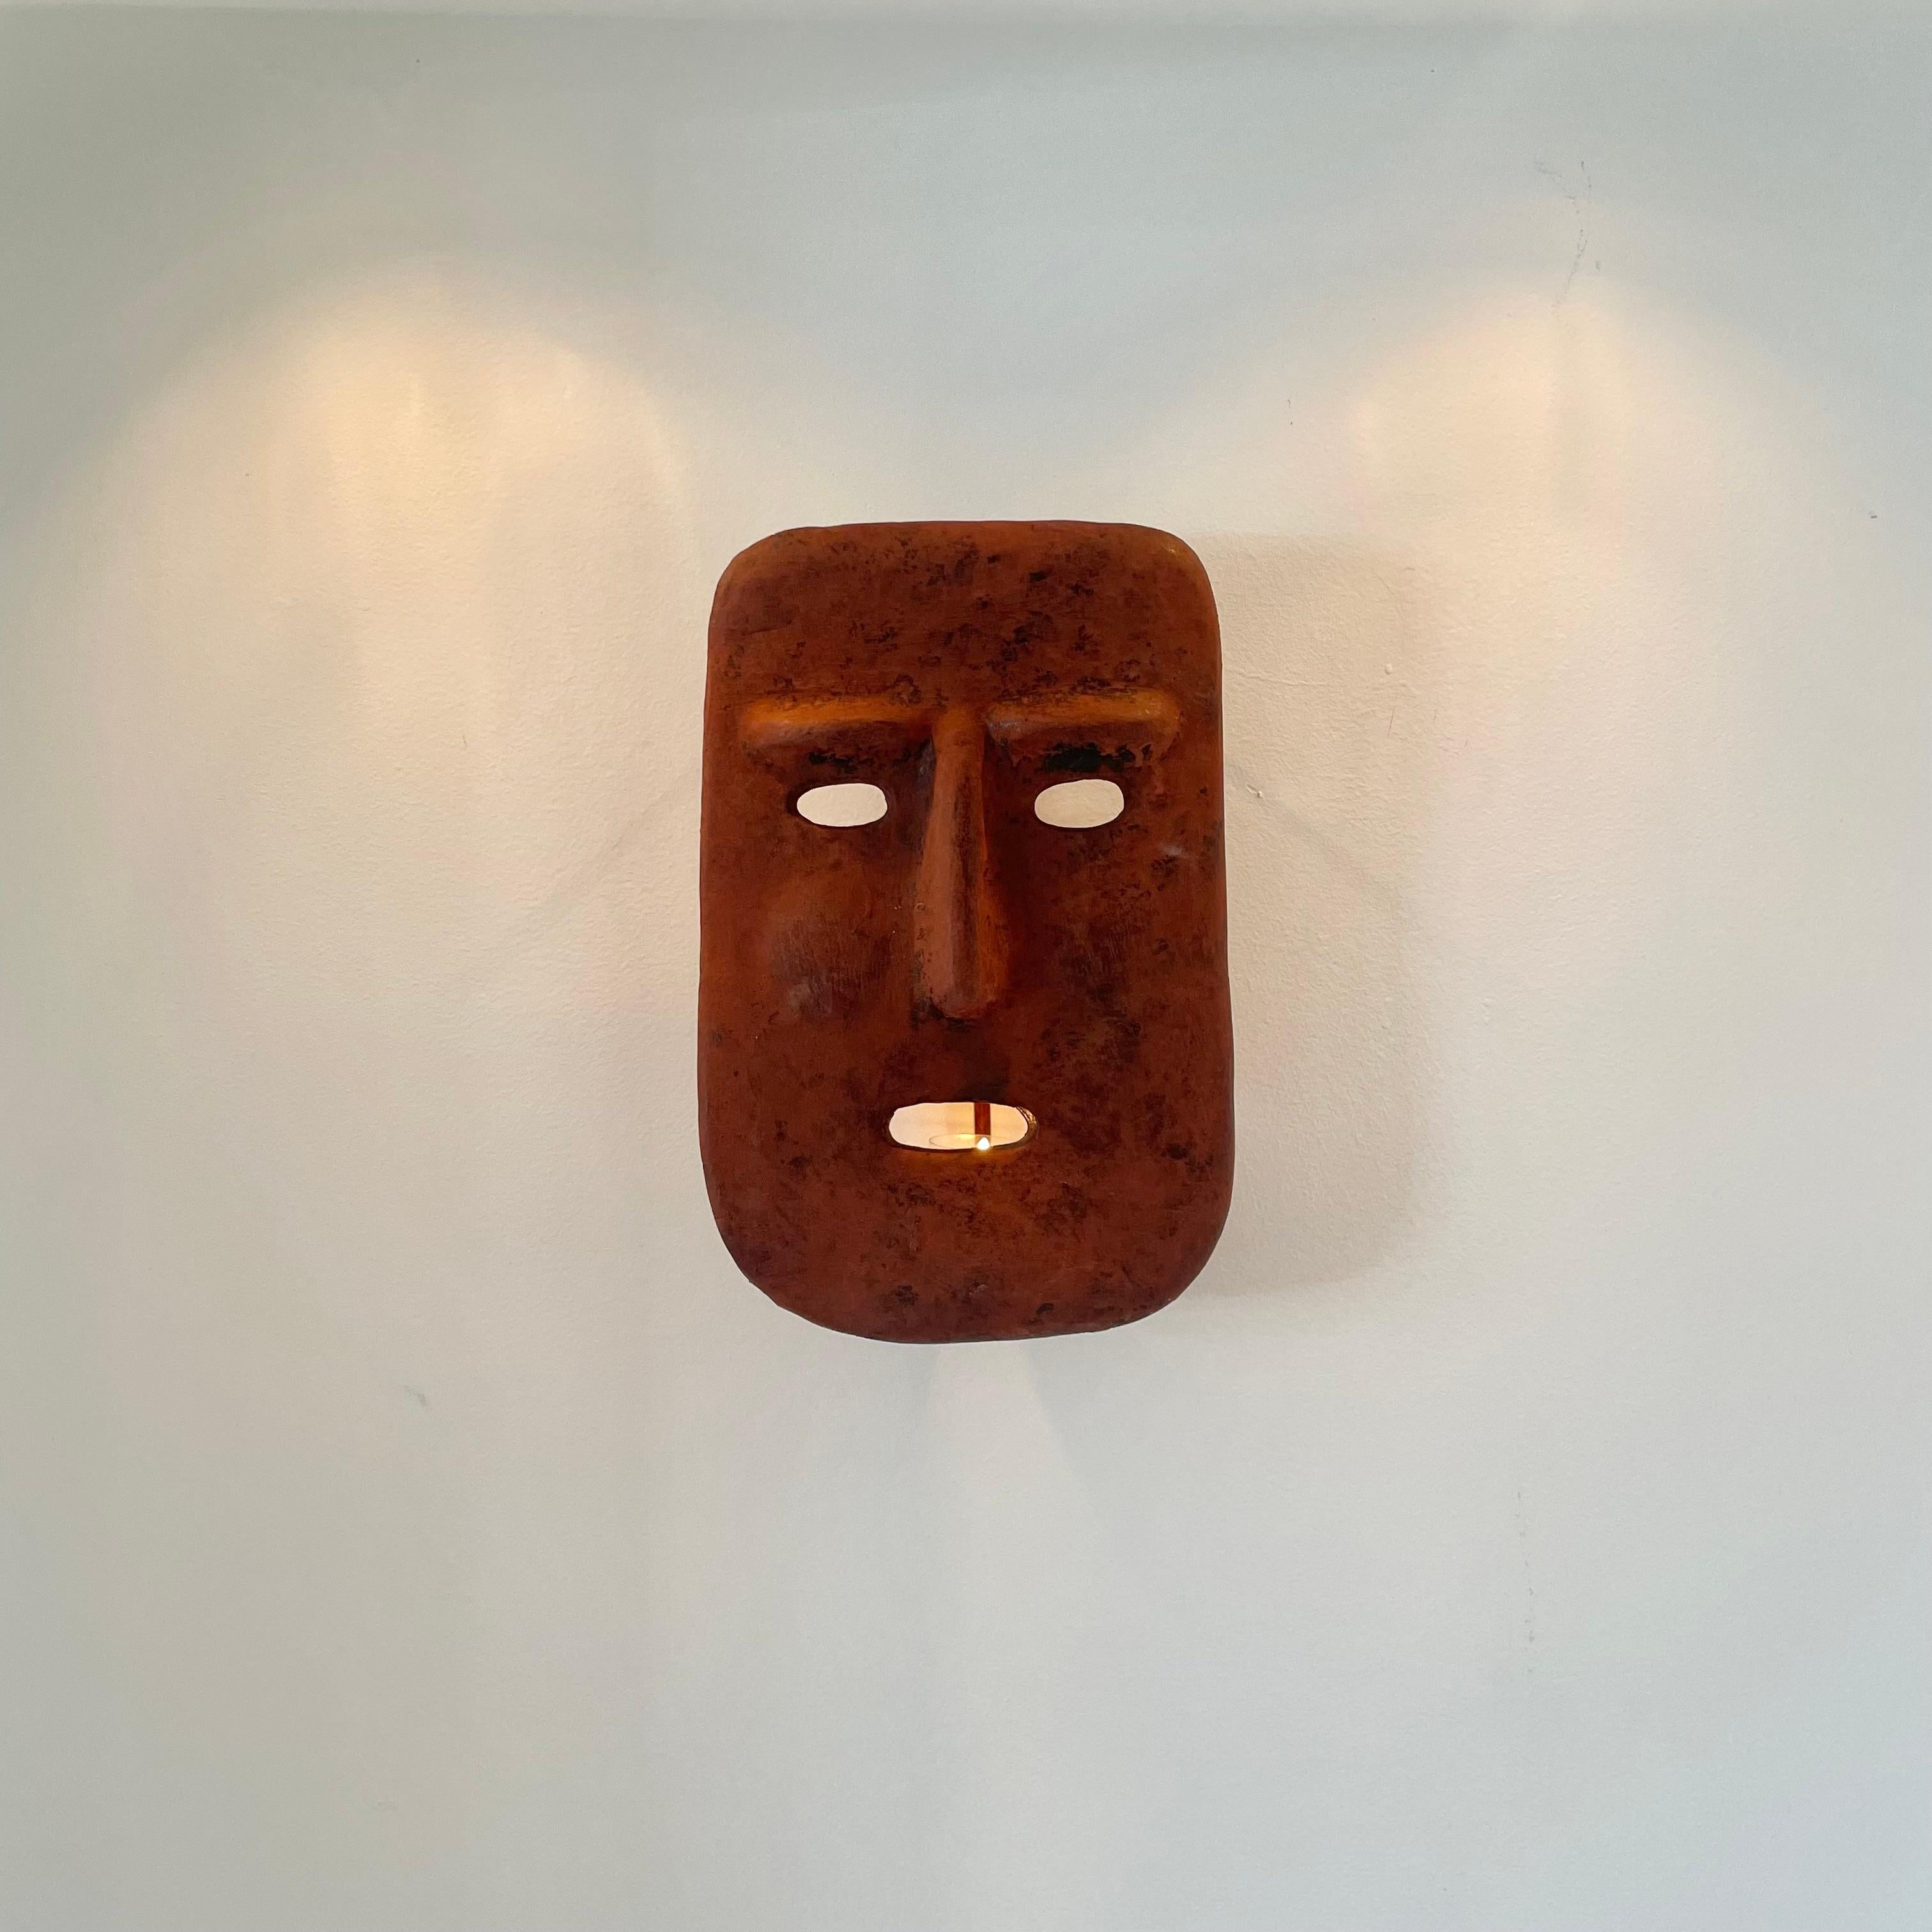 Sculptural clay mask candle sconce made in Italy. Hand made in an aged adobe color with a place for a single candle inside. Mask has a metal frame which gives the piece a nice depth from the wall and provides a surface for the candle to sit on.